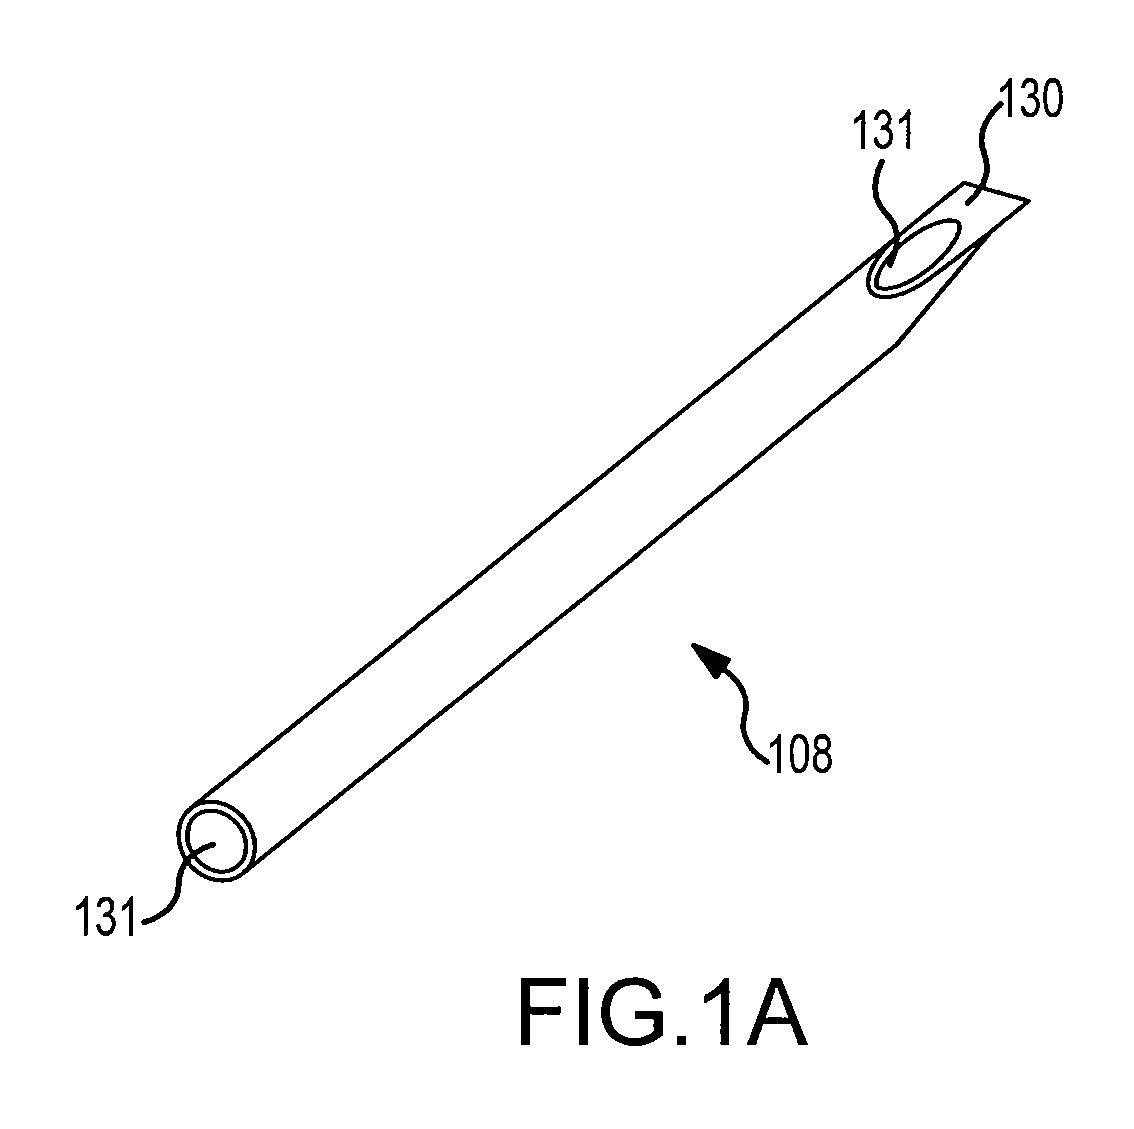 Facet joint implants and delivery tools